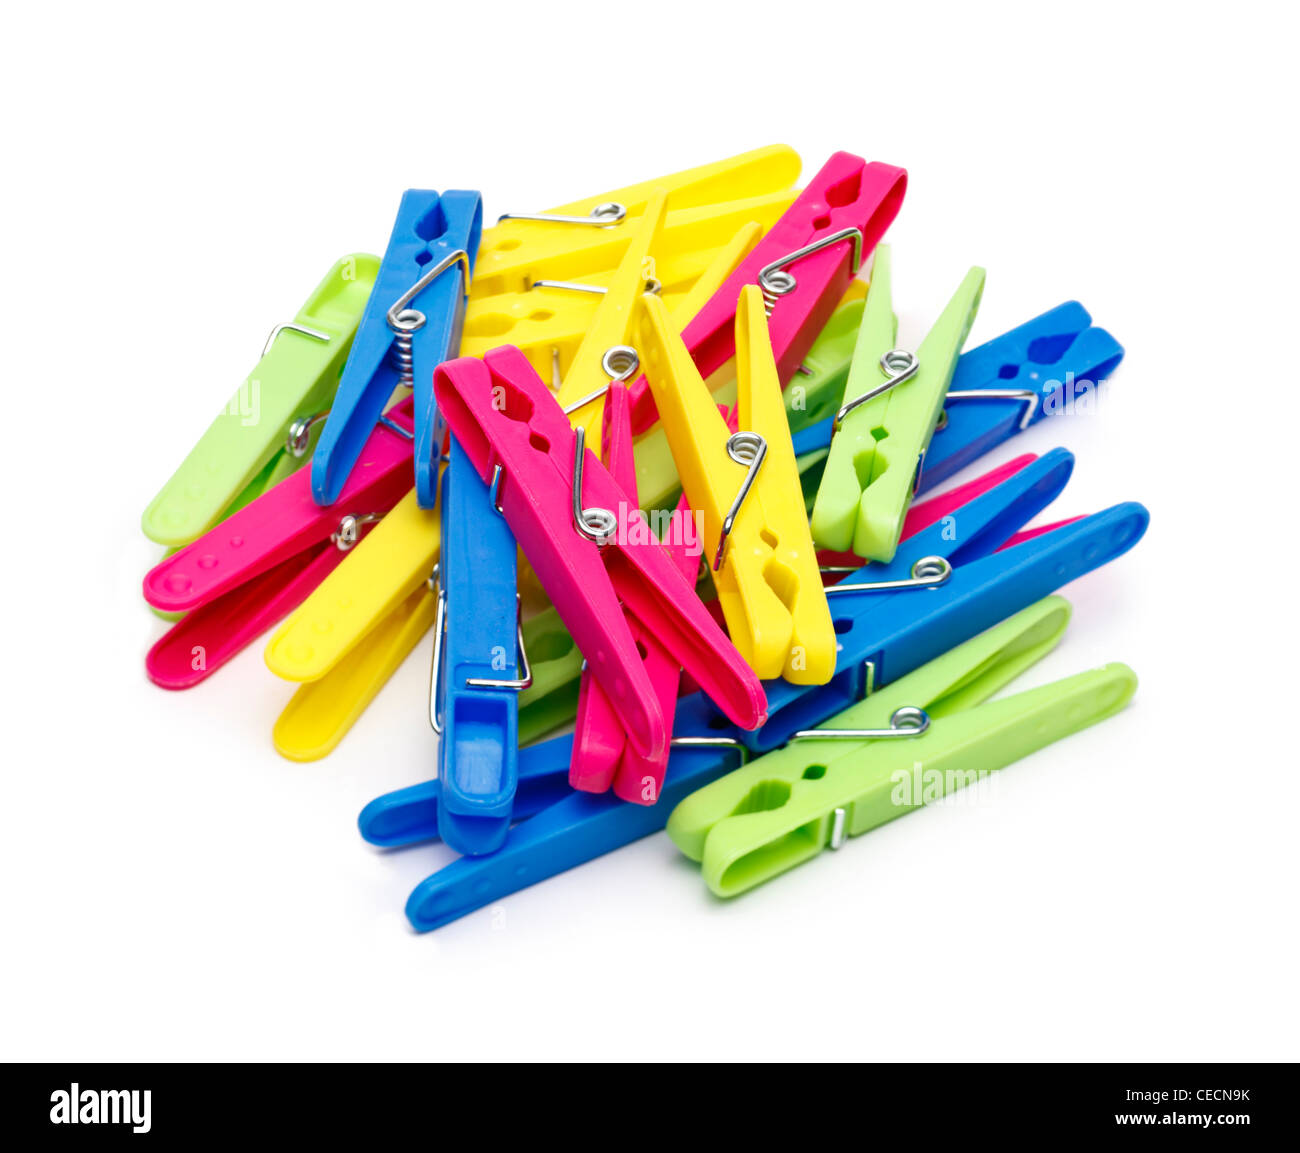 Pile of clothes pegs on white background Stock Photo